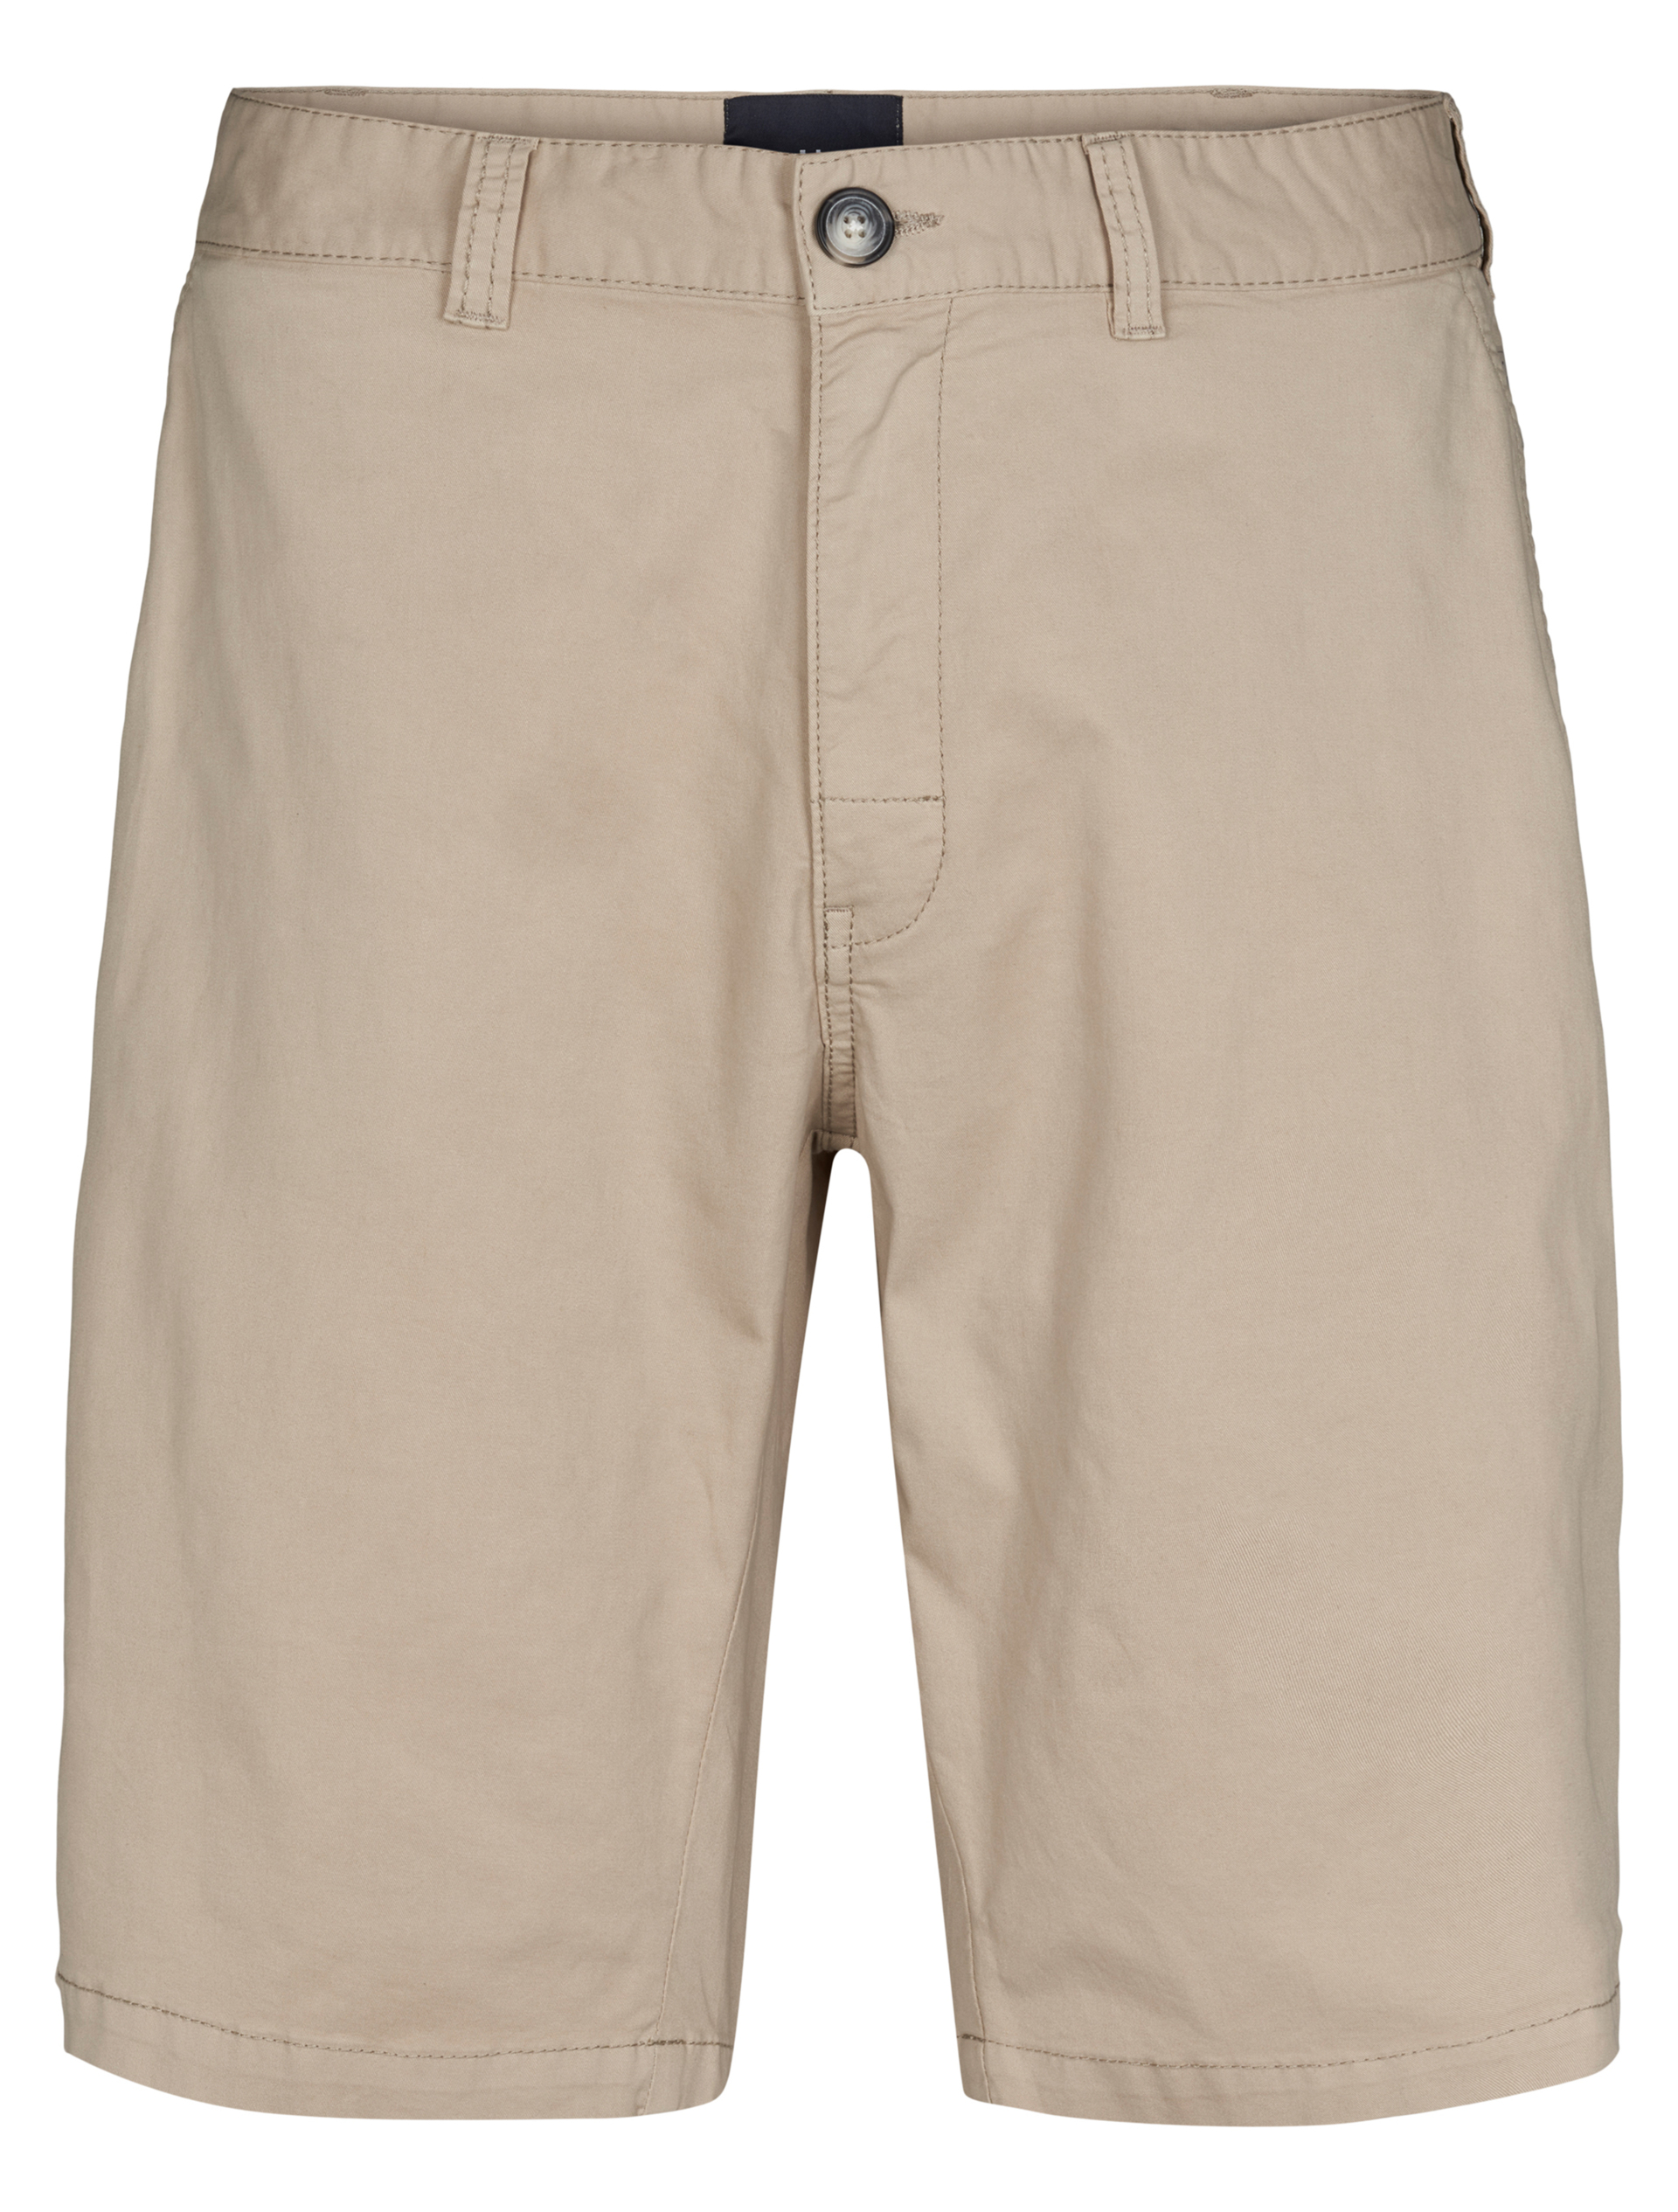 North Casual shorts sand / 0729 lt sand